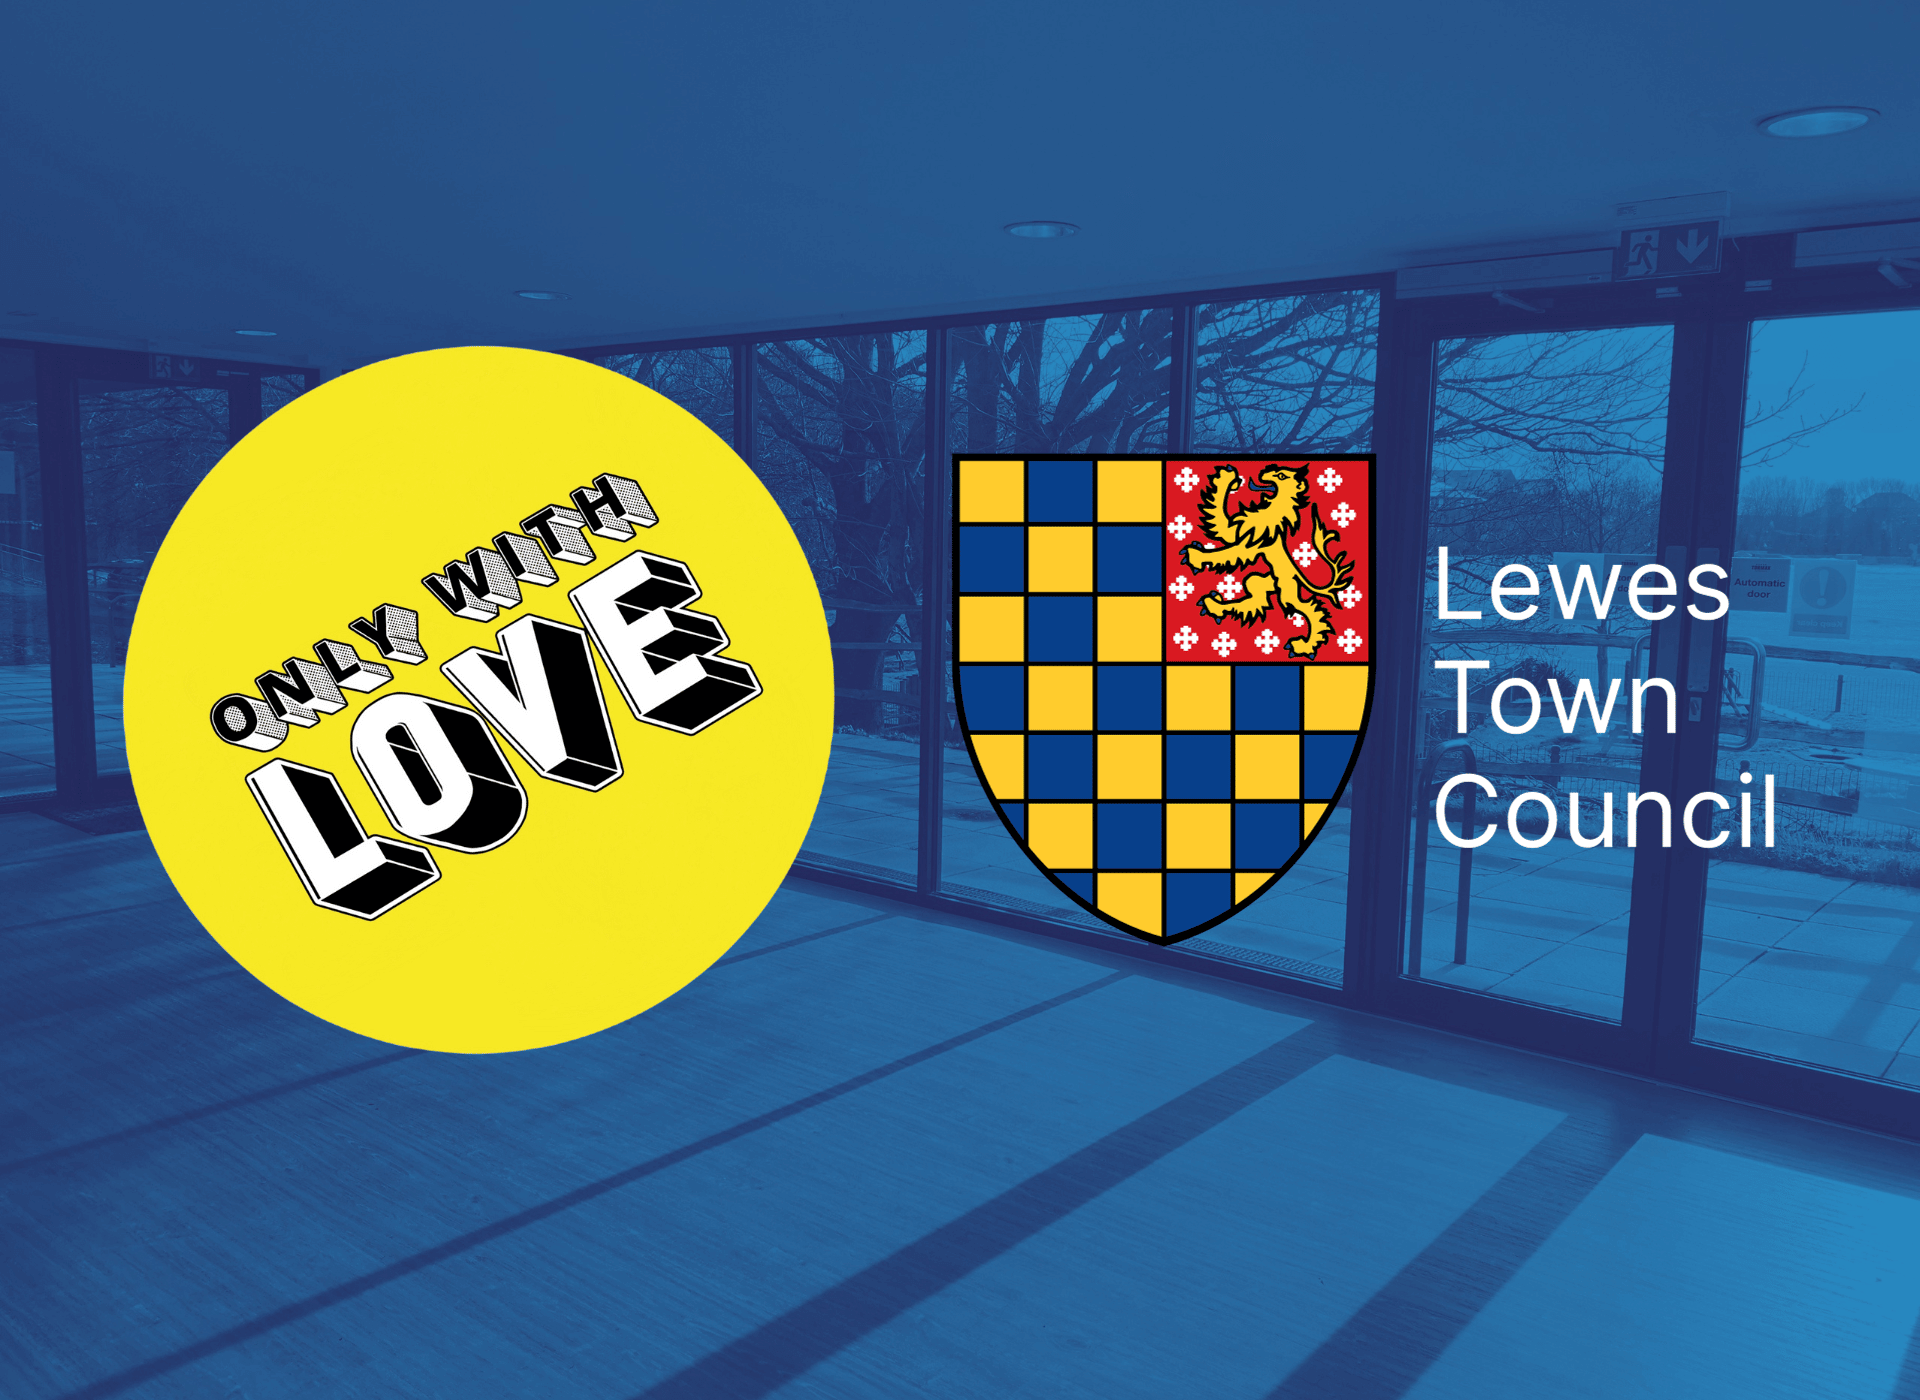 Only With Love and Lewes Town Council Logos